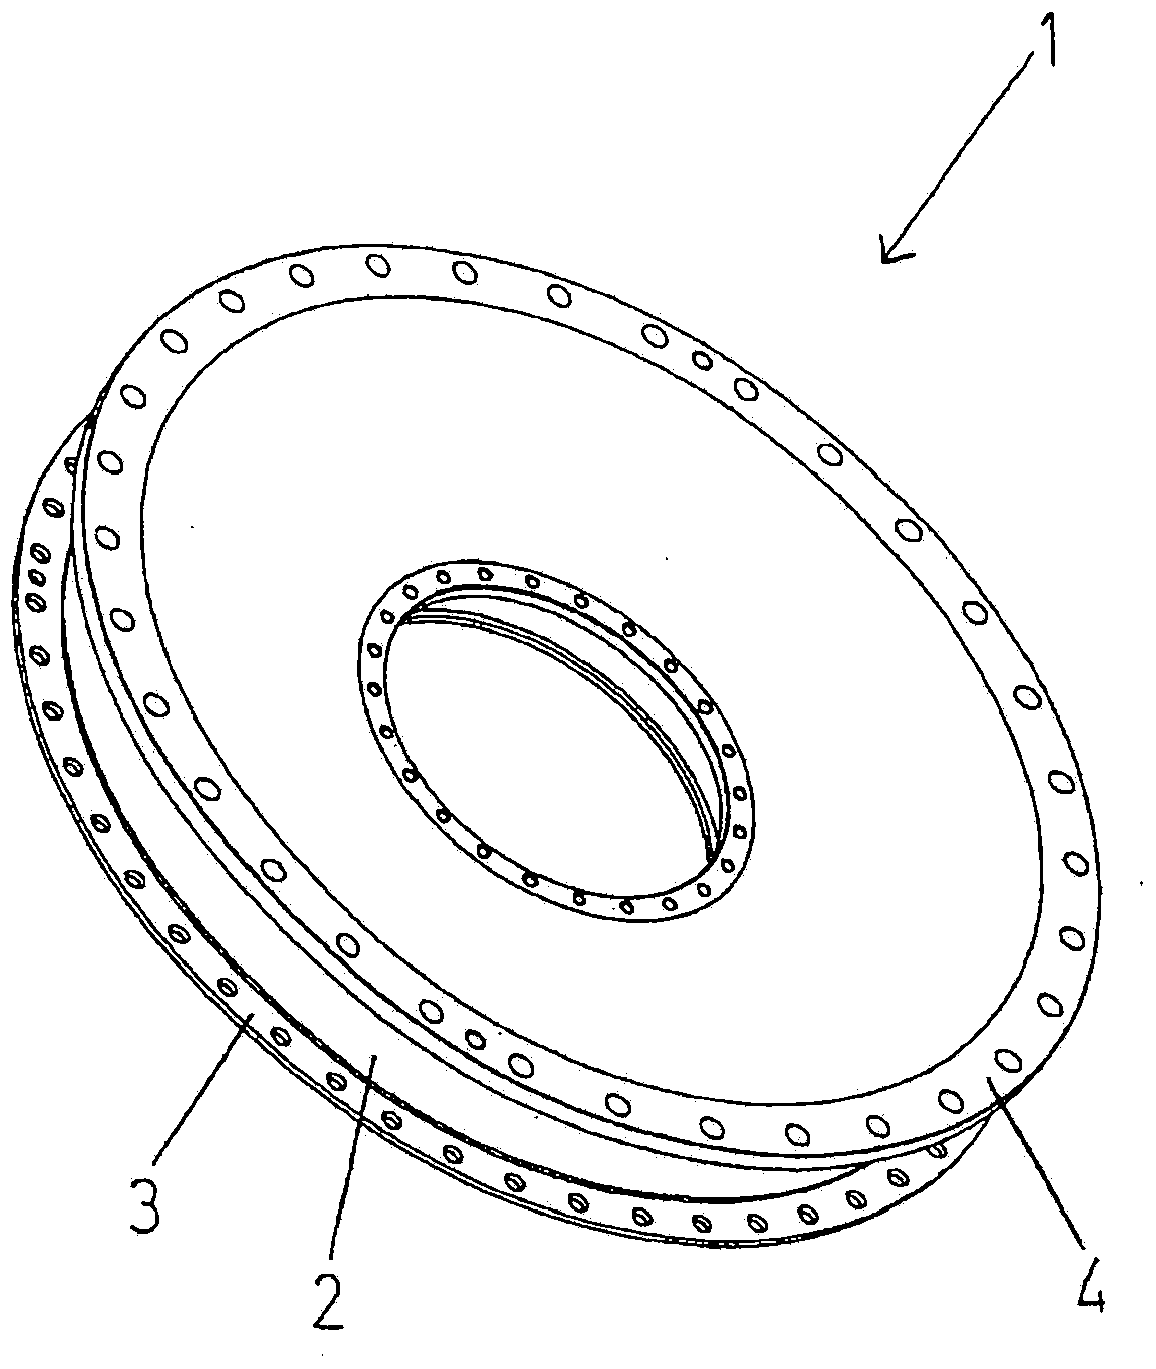 Method for producing a coupling segment of a flexible coupling